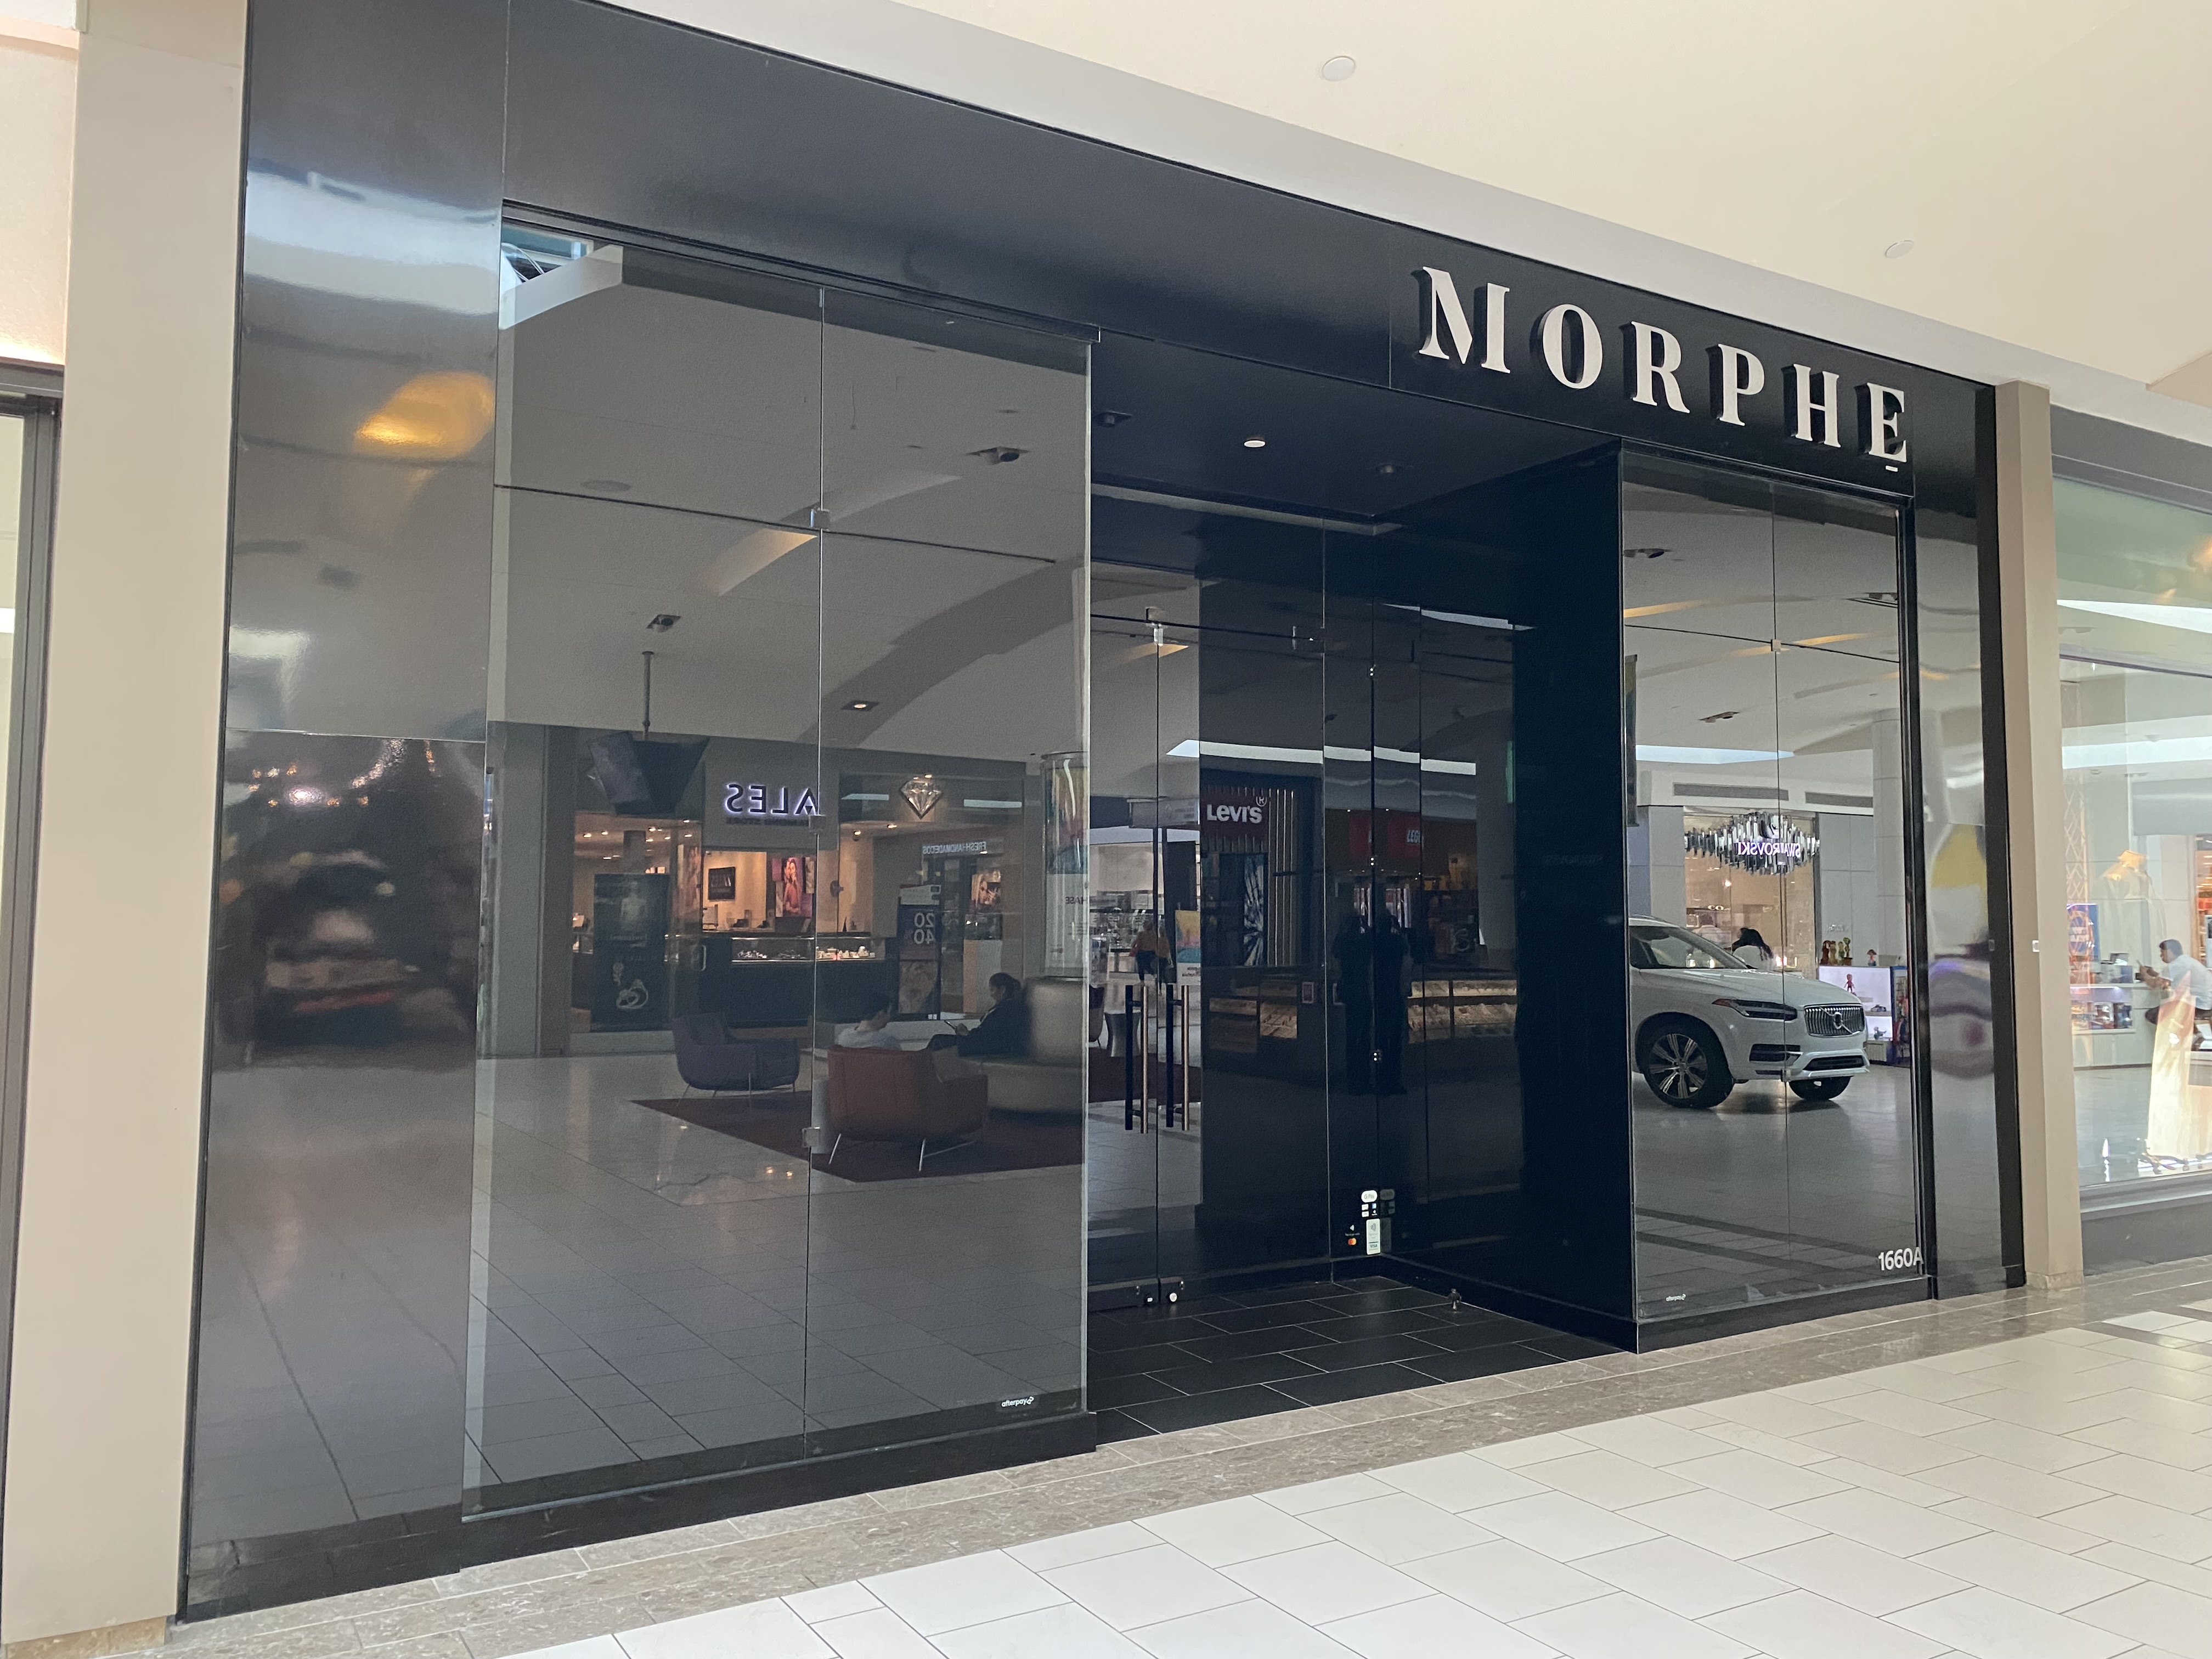 Bankrupt Morphe Owner Acquired by Lenders for $690 Million